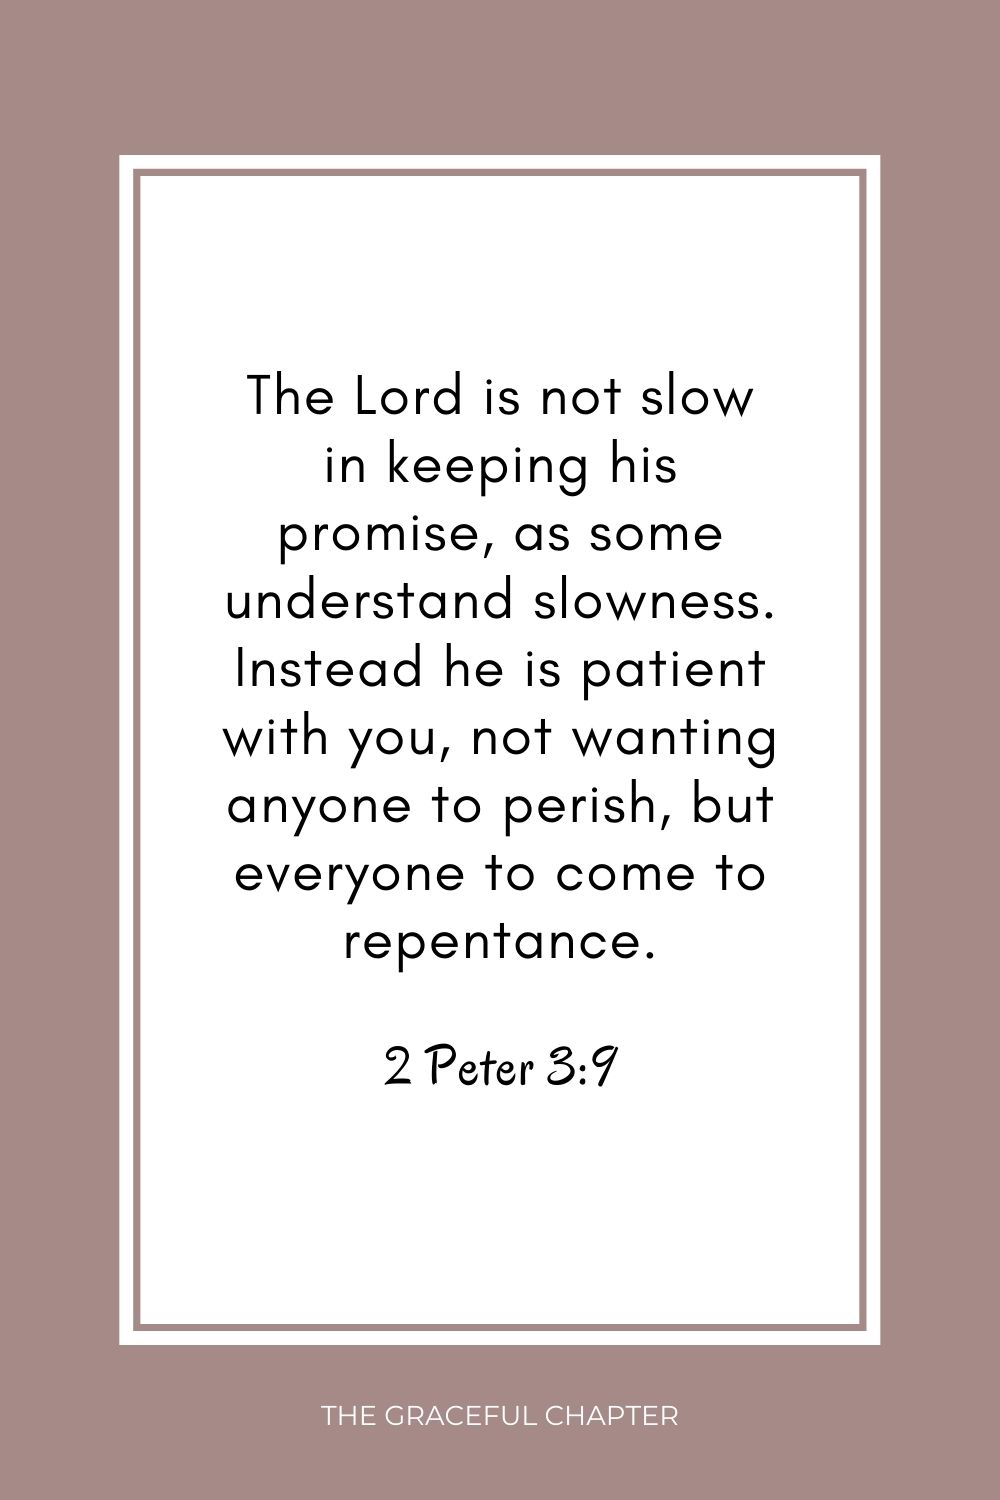 The Lord is not slow in keeping his promise, as some understand slowness. Instead he is patient with you, not wanting anyone to perish, but everyone to come to repentance. 2 Peter 3:9 being born again